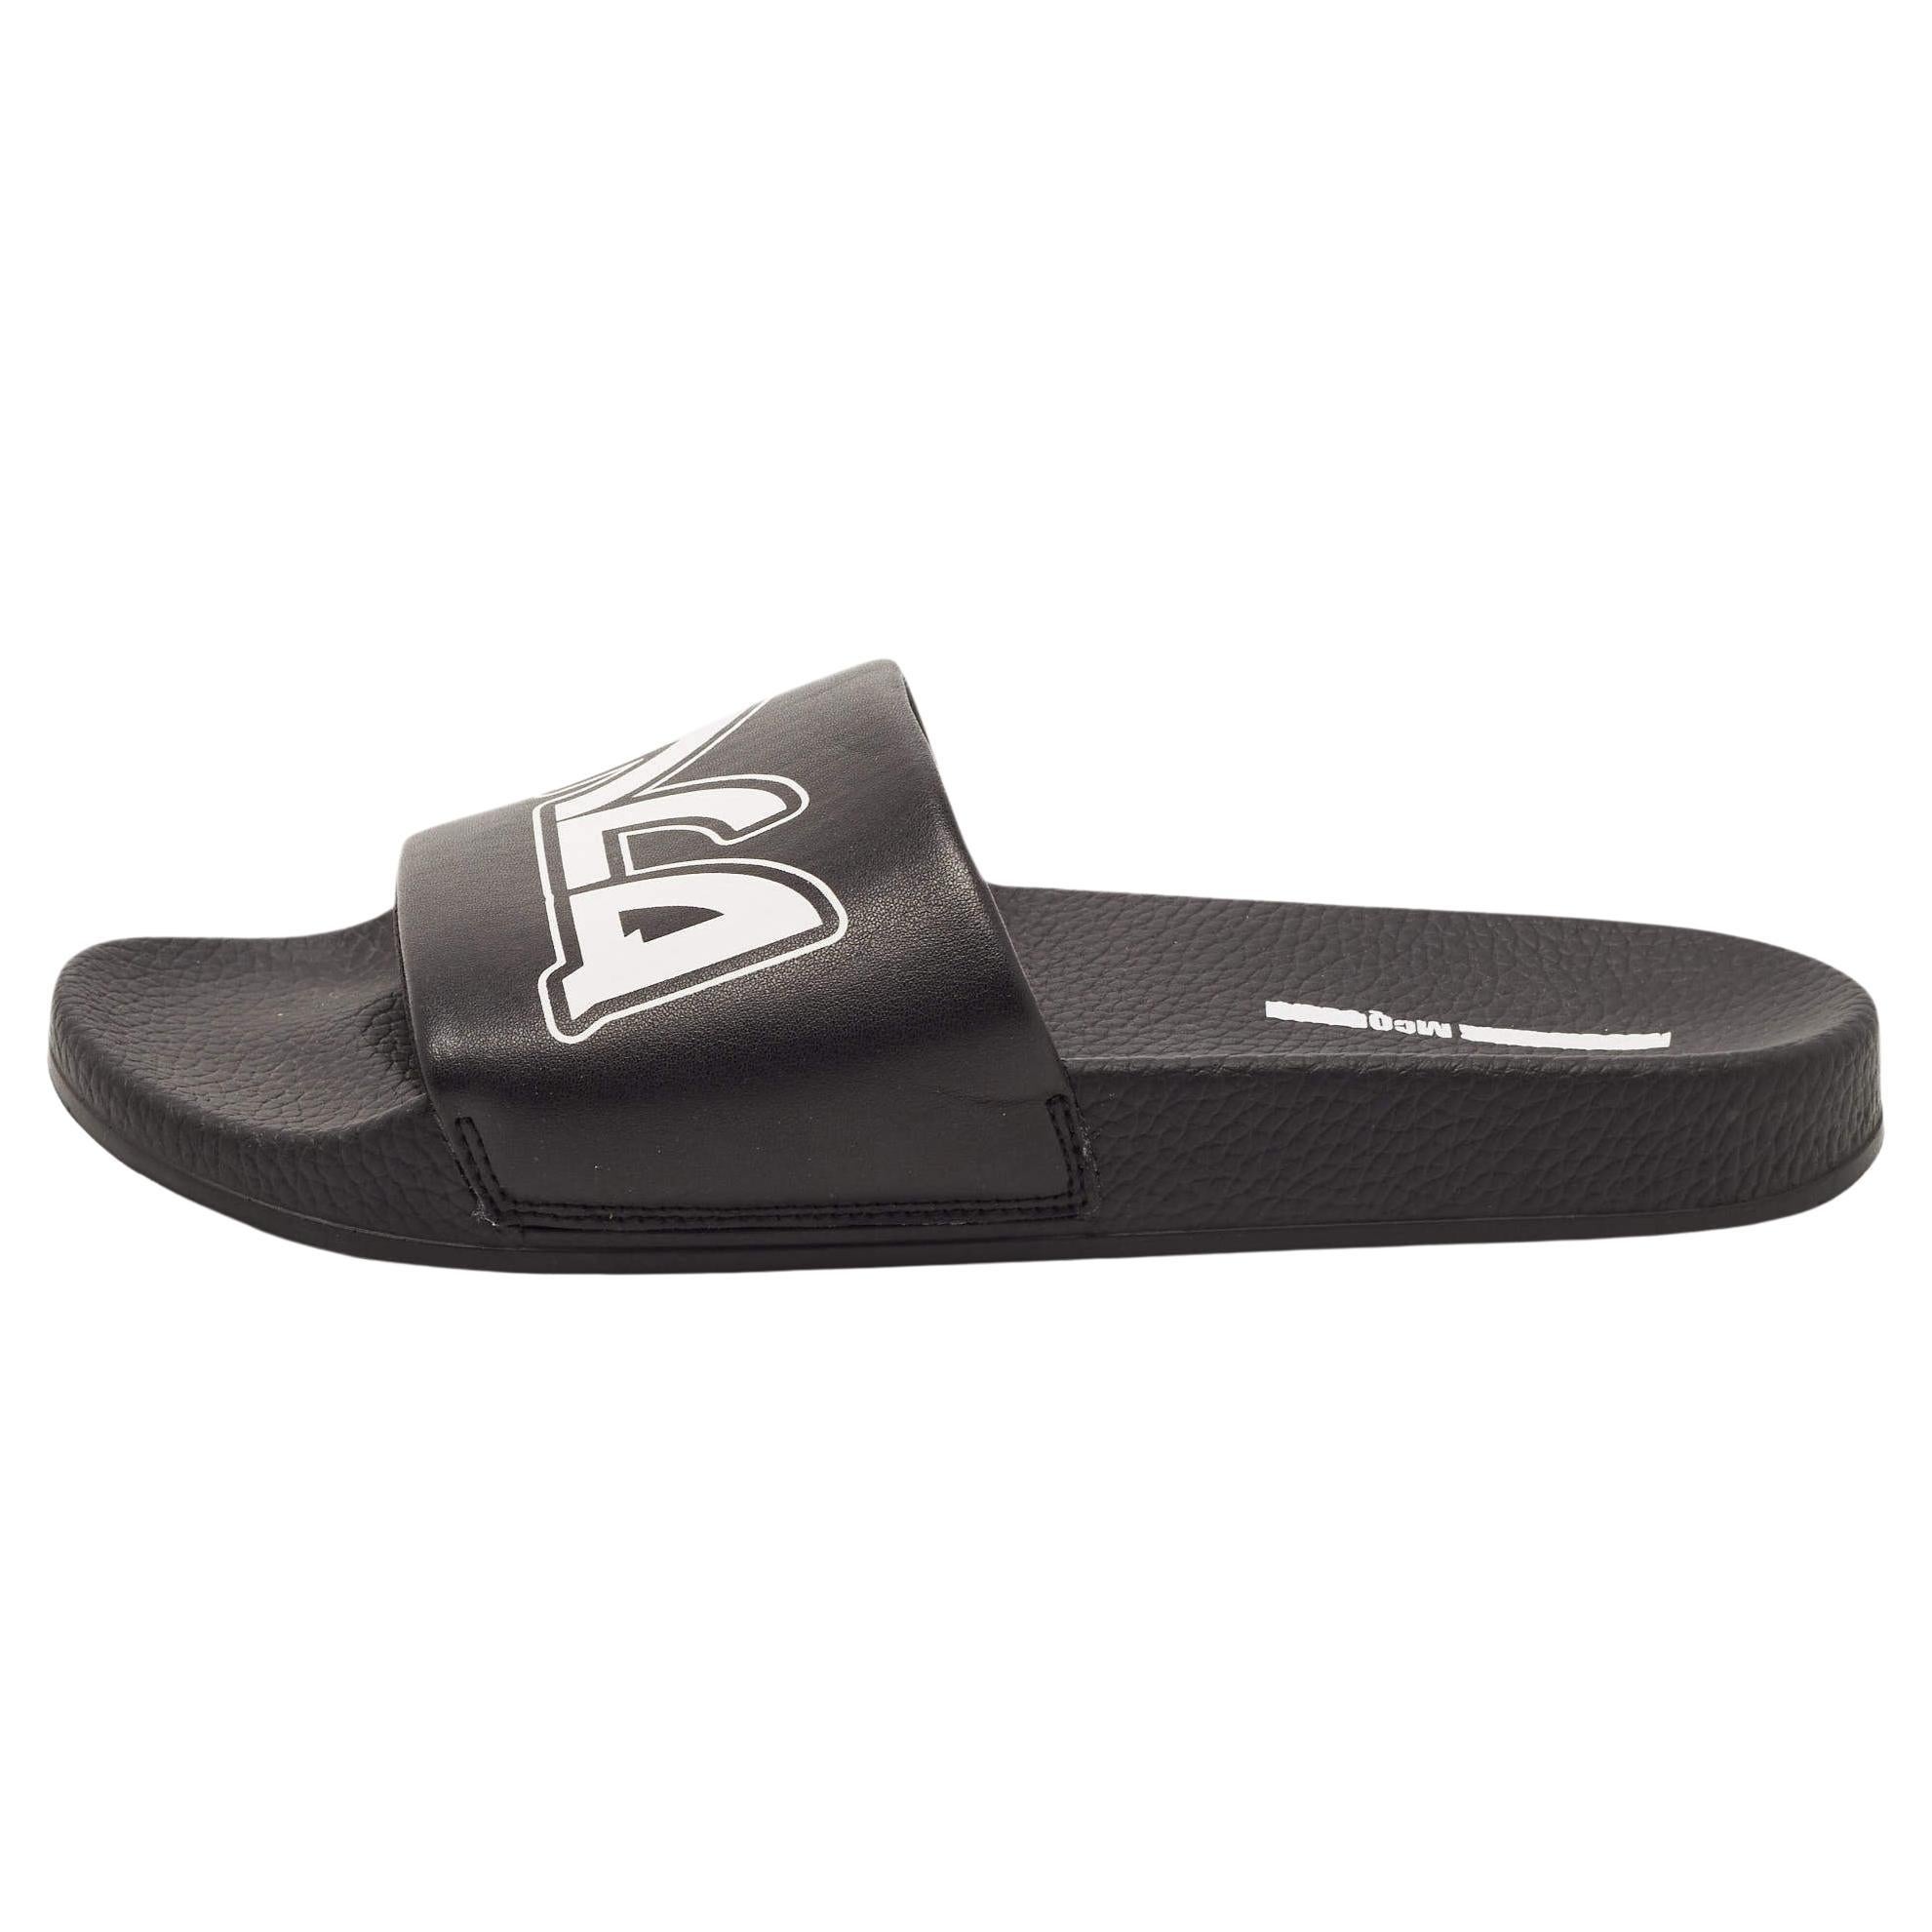 McQ by Alexander McQueen Black Faux Leather Logo Slides Size 42